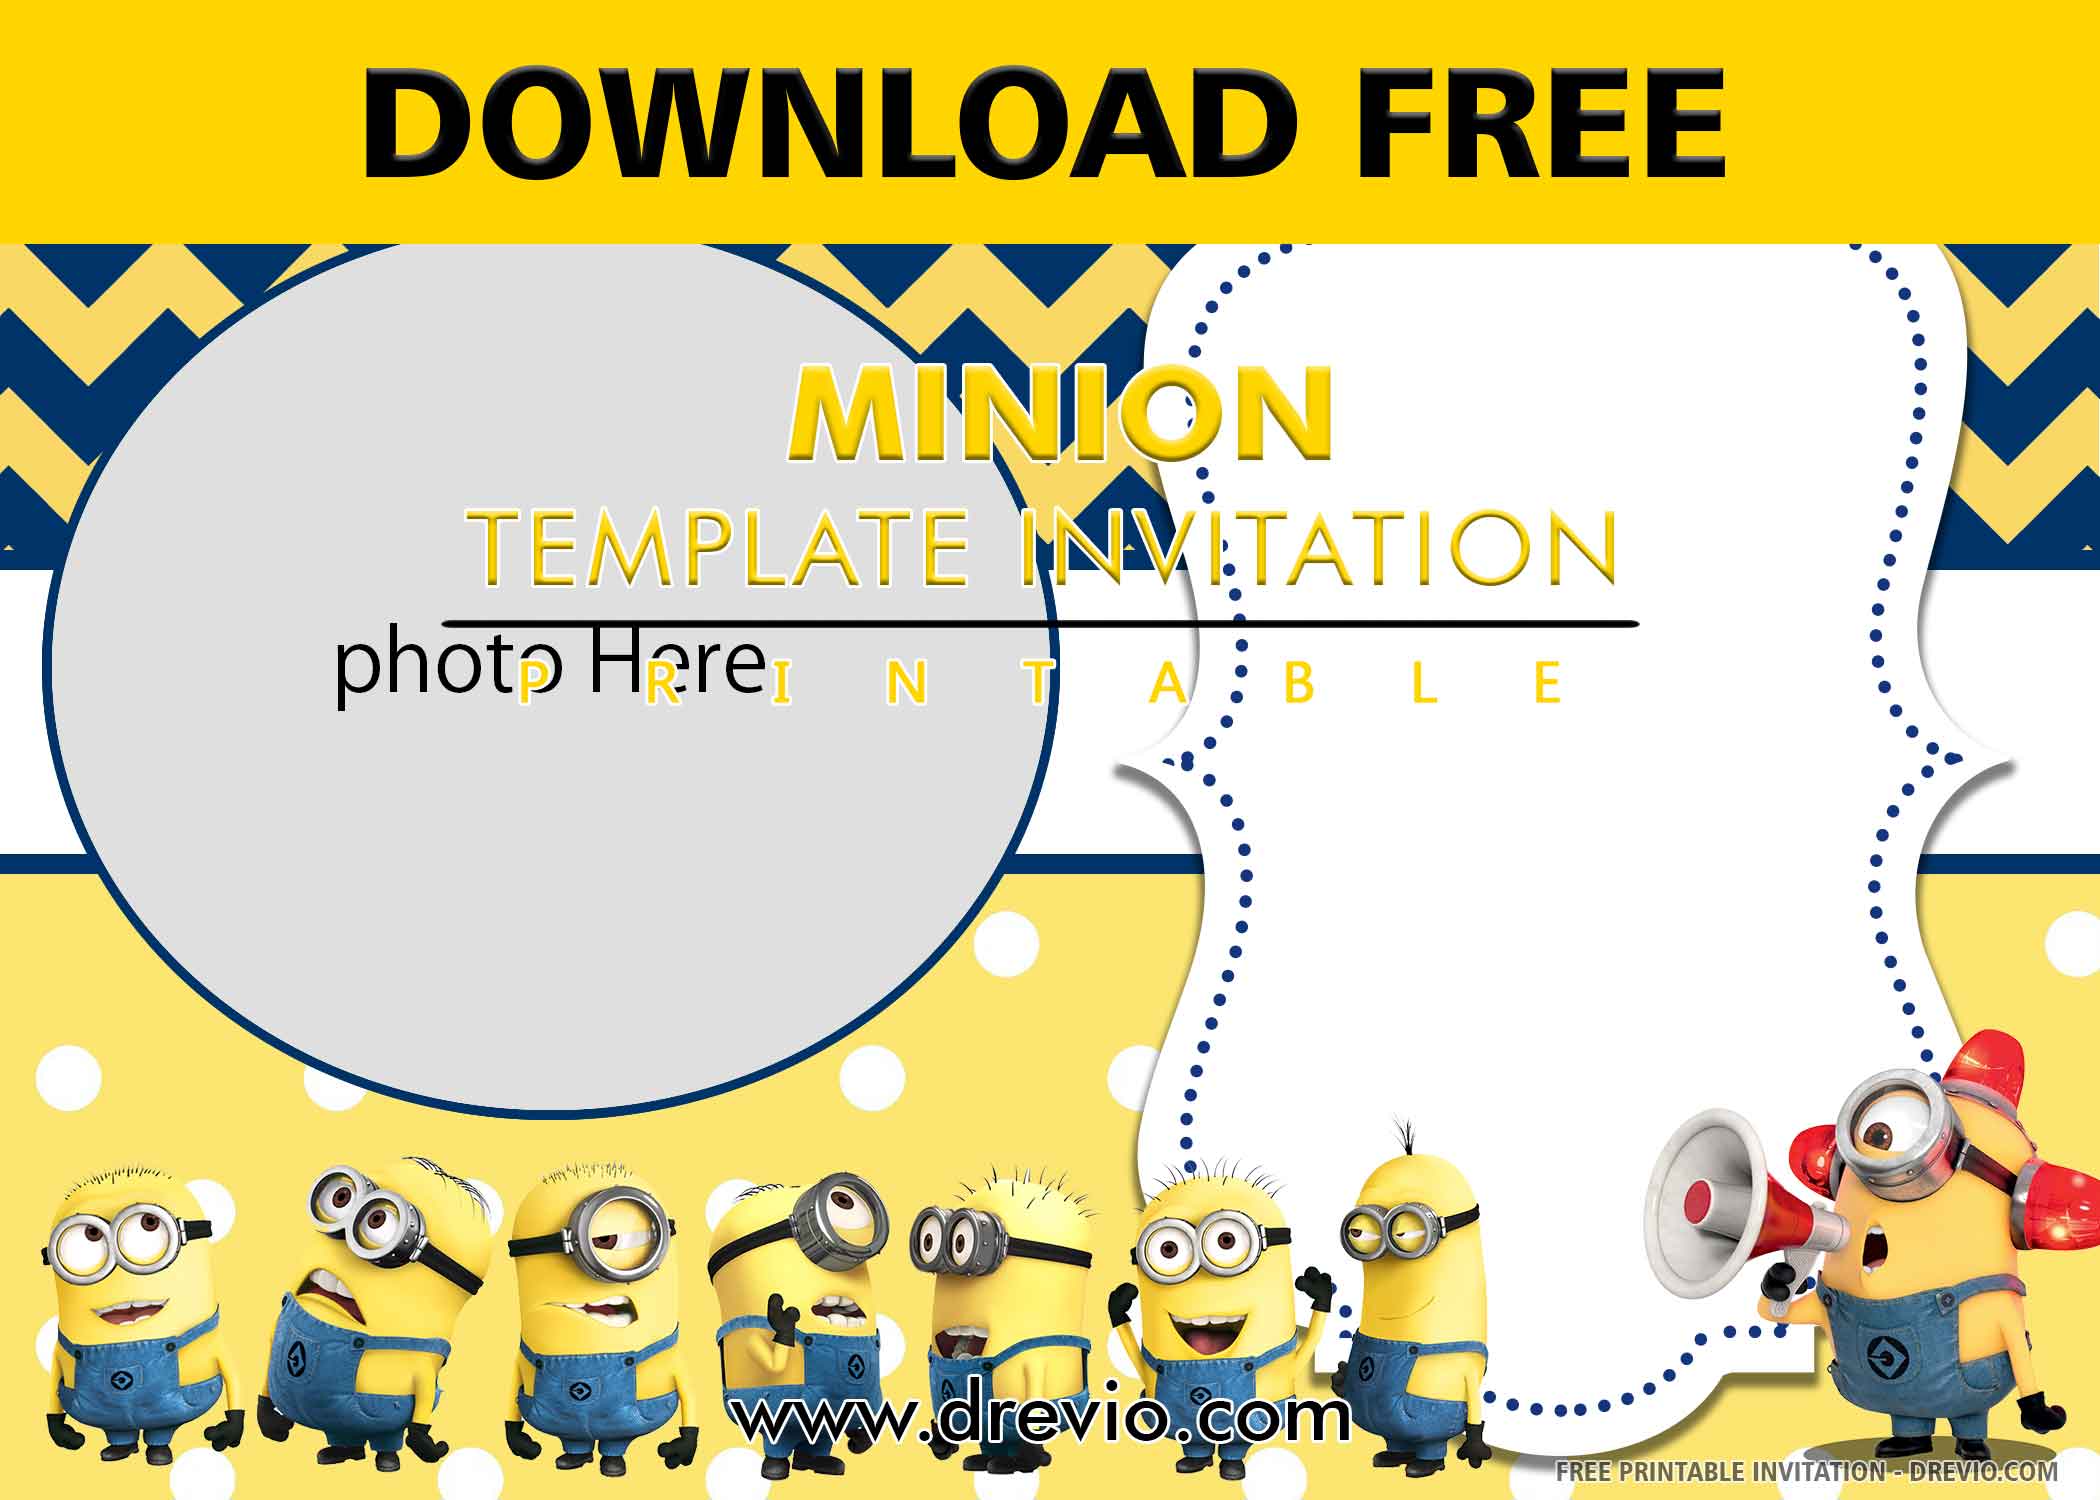 minion-invitation-card-watermark  Download Hundreds FREE Throughout Minion Card Template